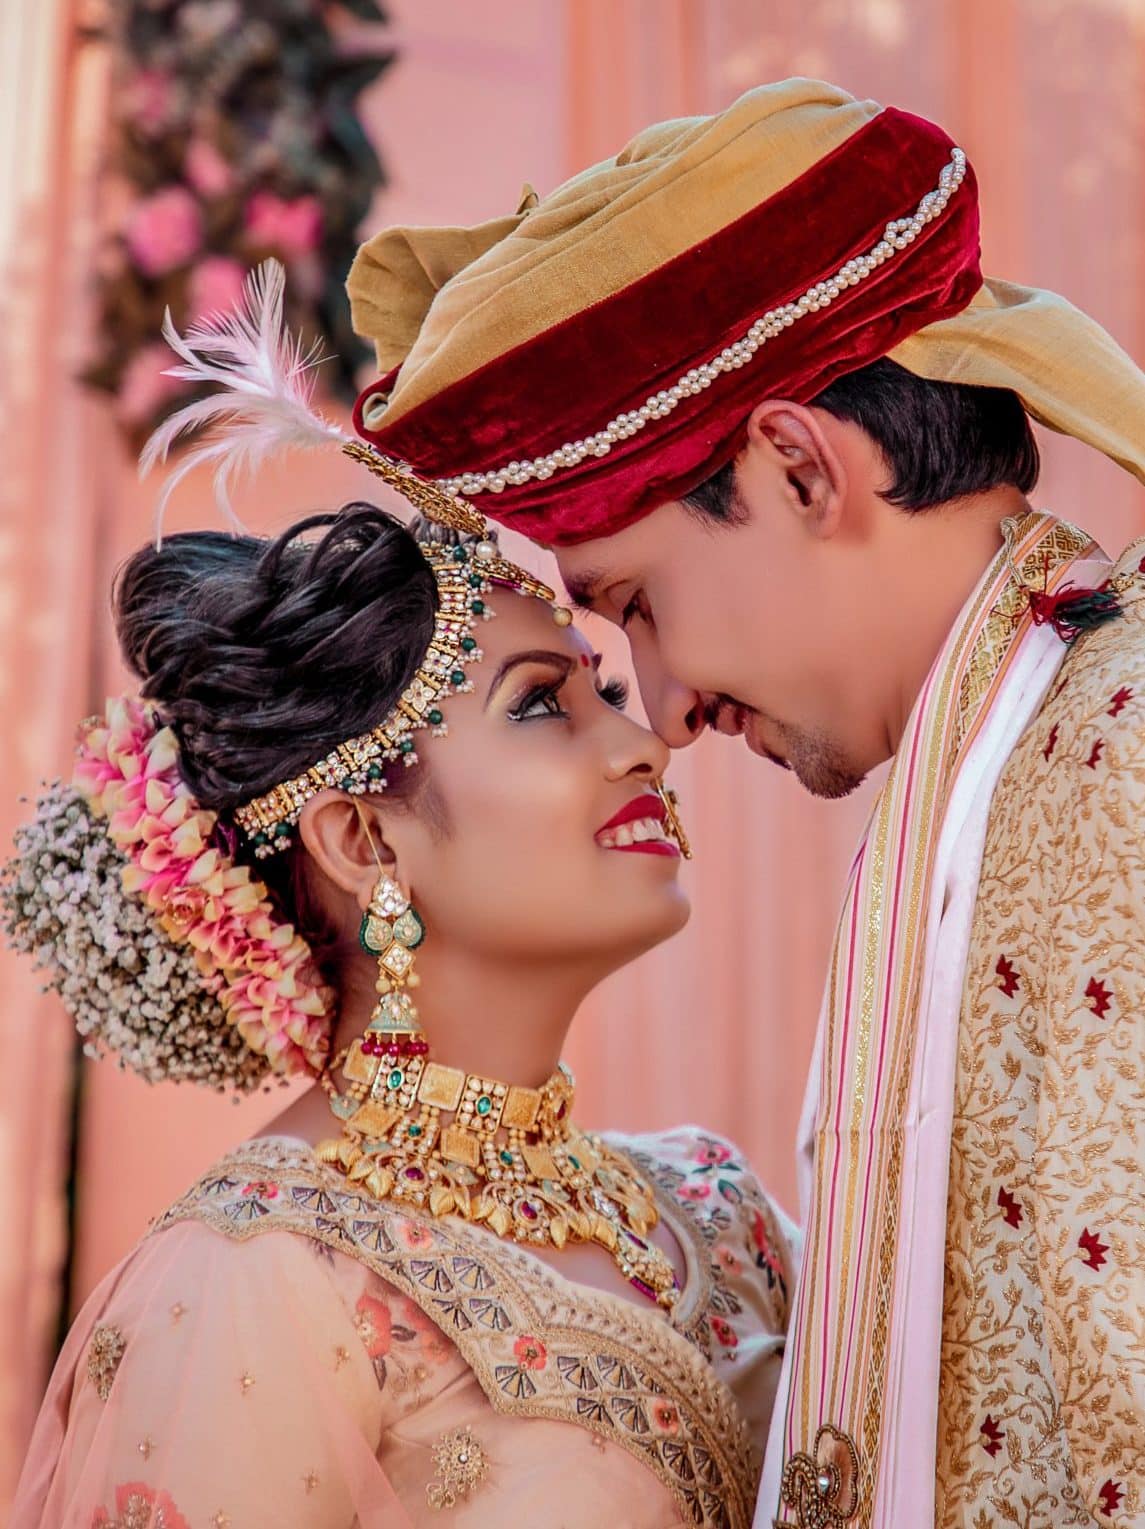 Indian couple in wedding attire touches noses.